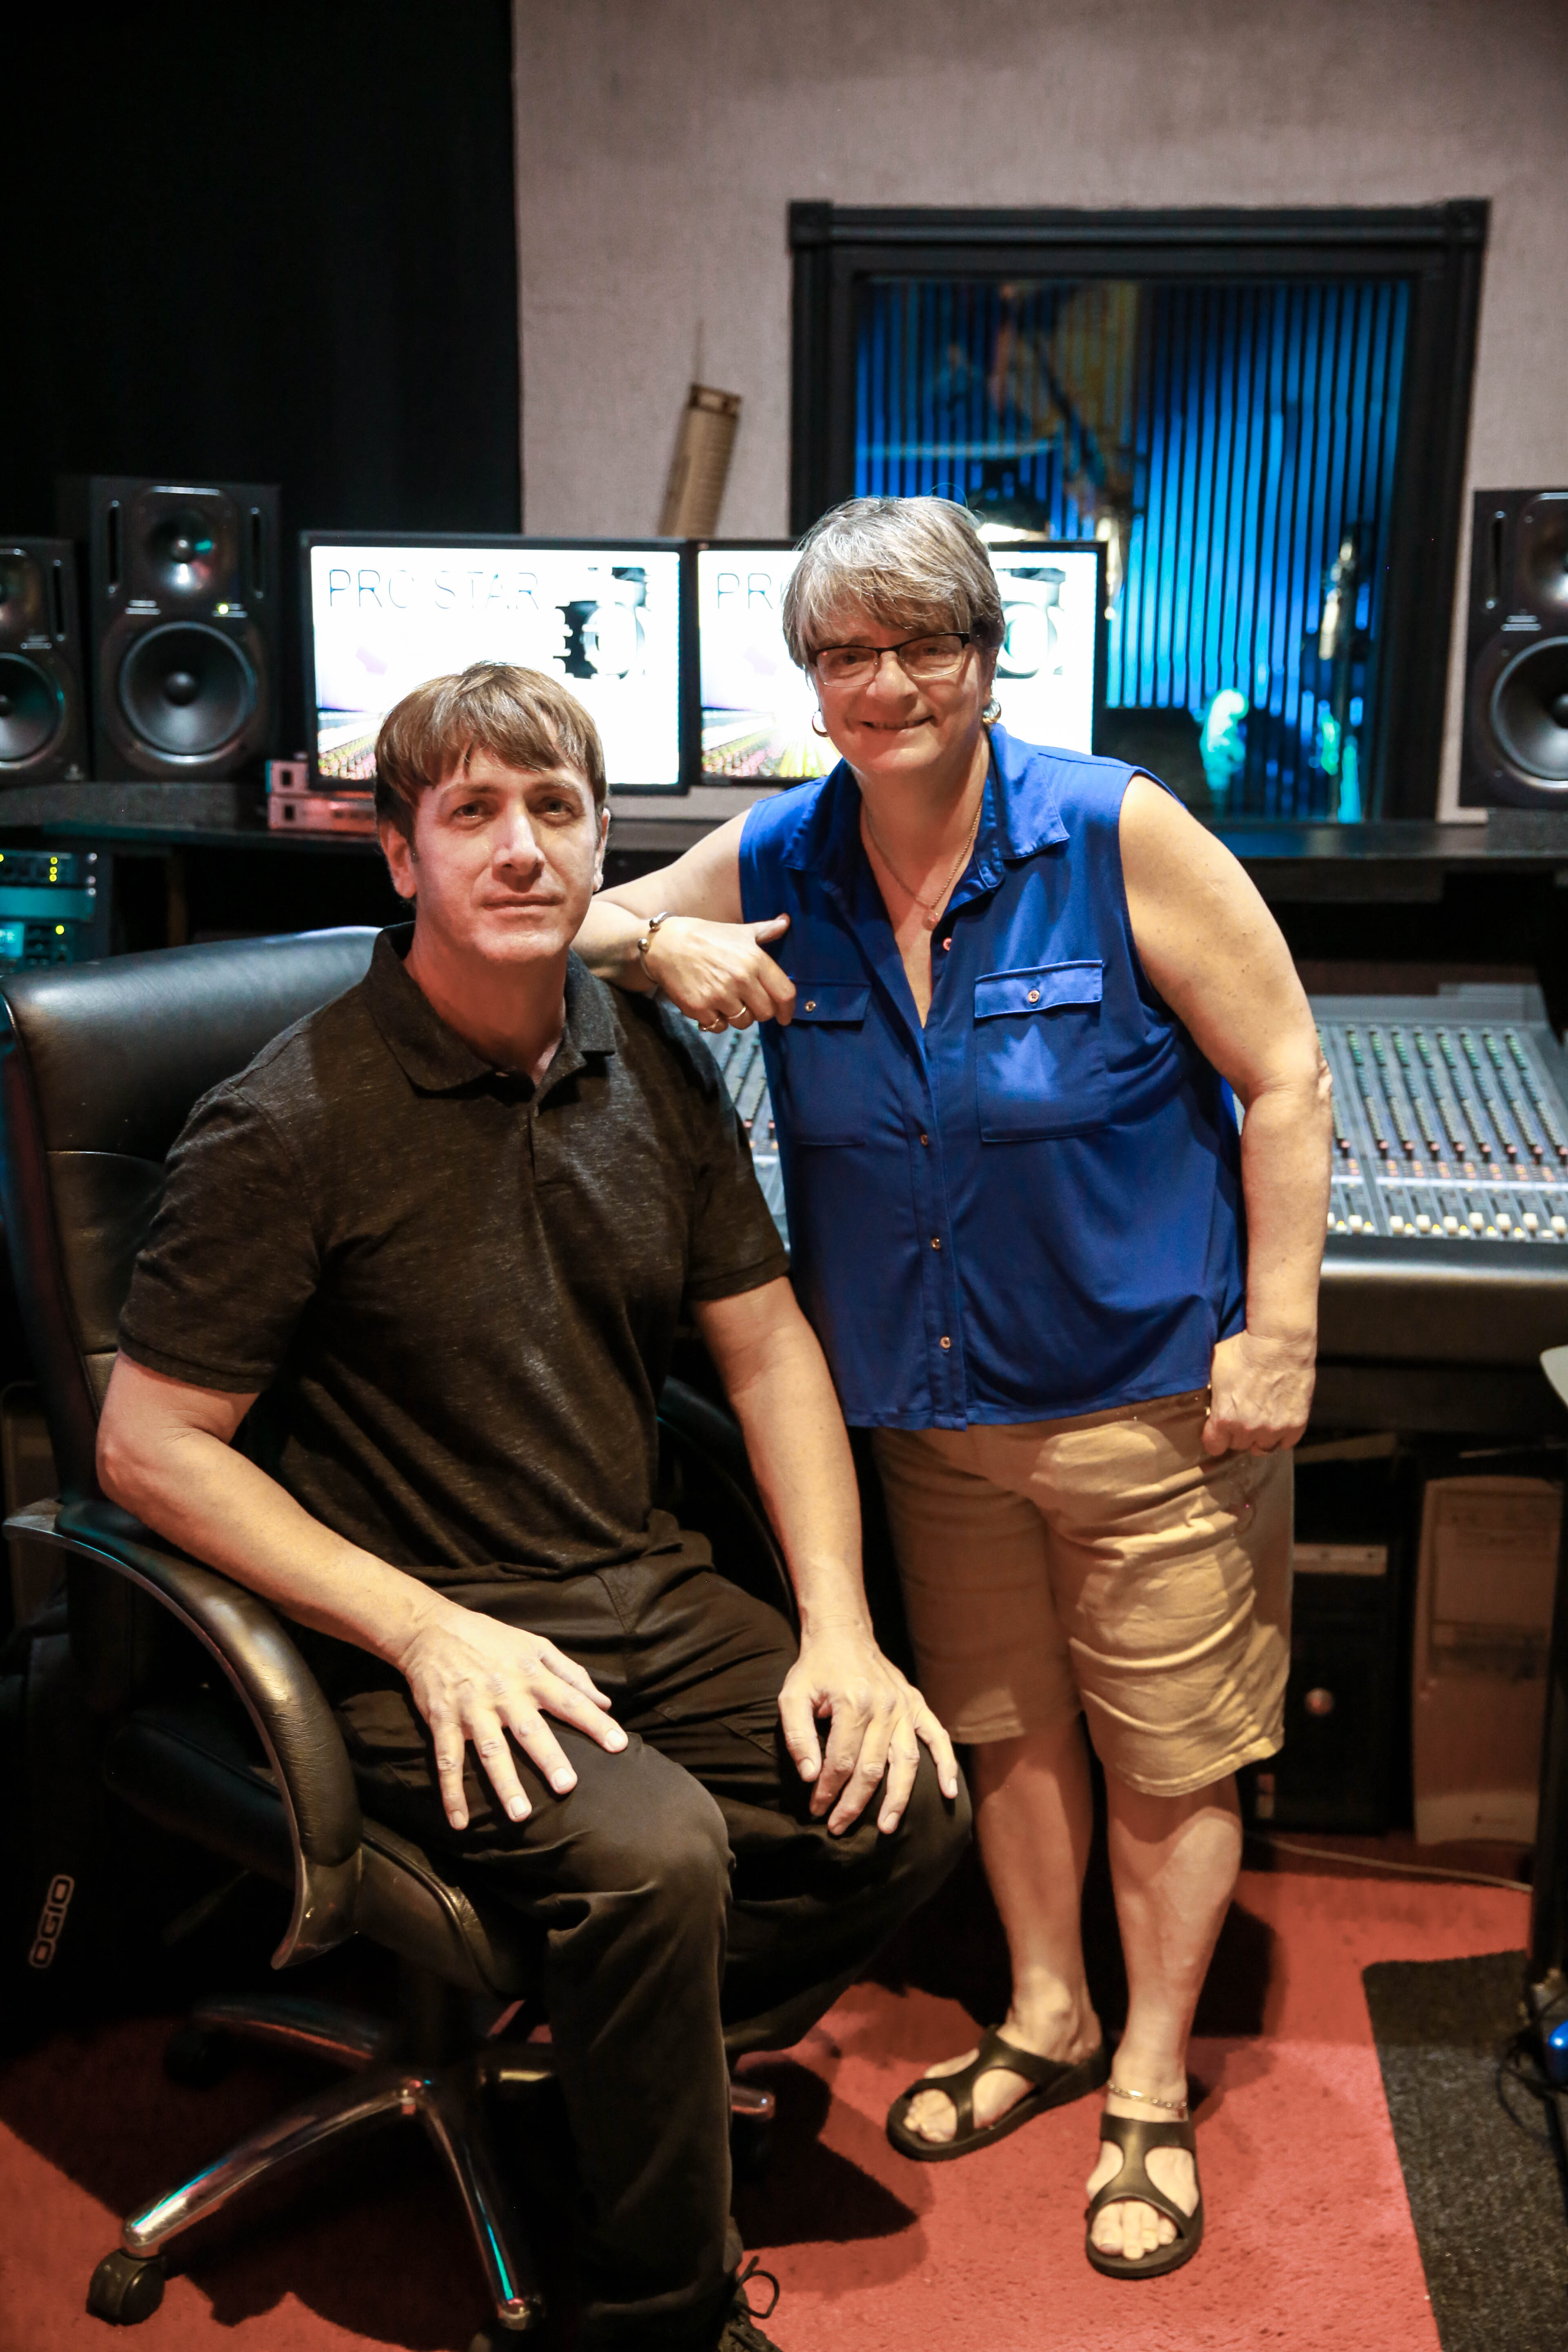 Pro Star Recording & Video Studio Co-Owners, Jody Gray and Jeannette Goldman